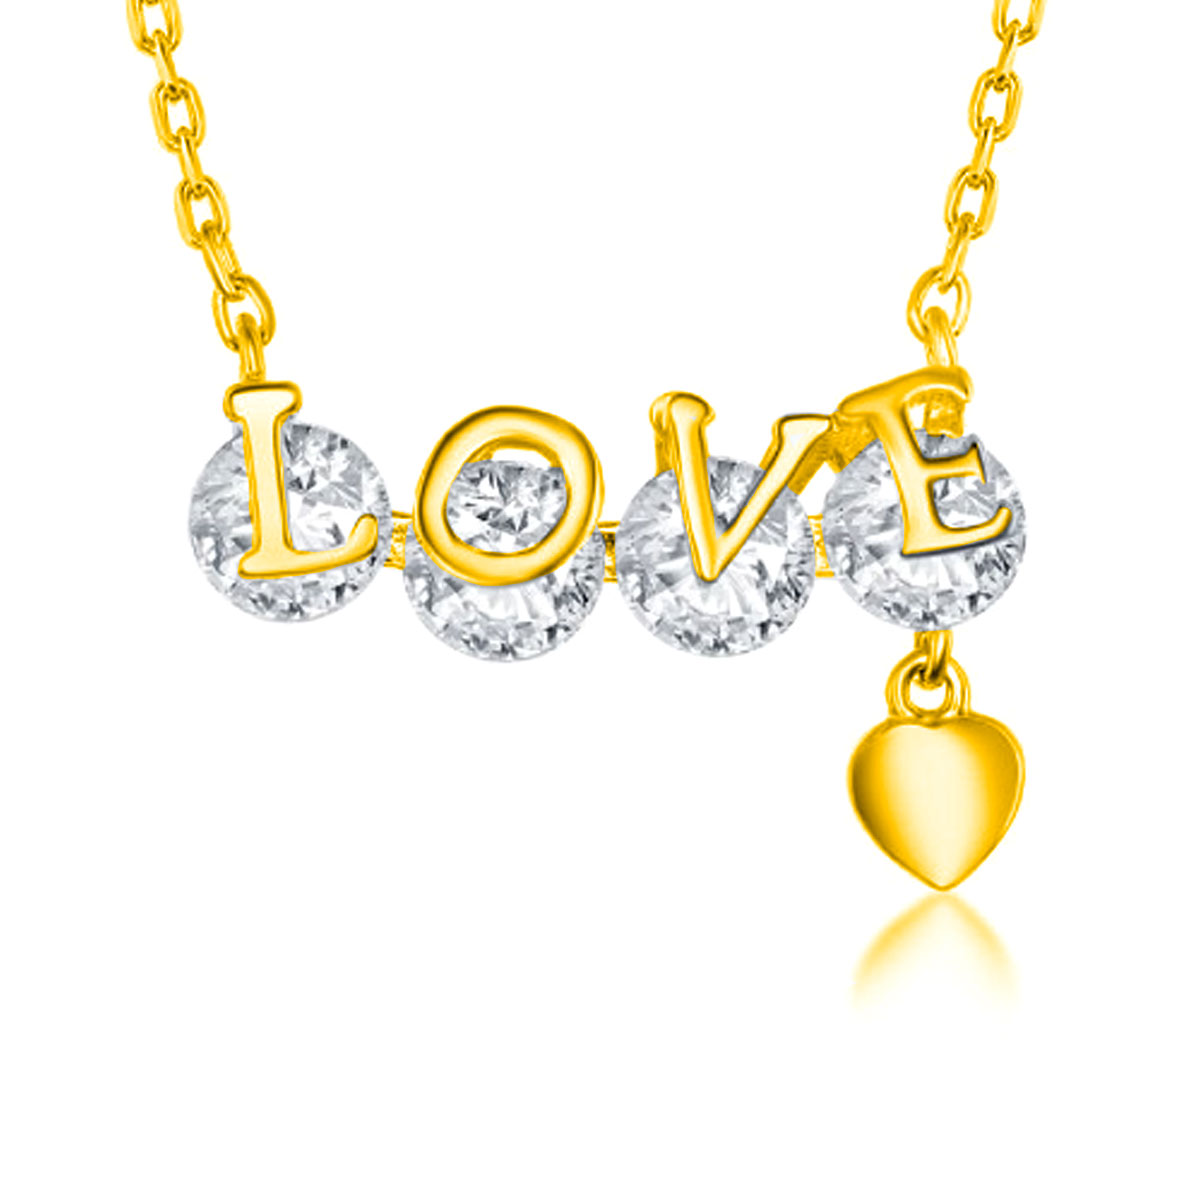 LOVE Alphabet Necklace in Gold Stone